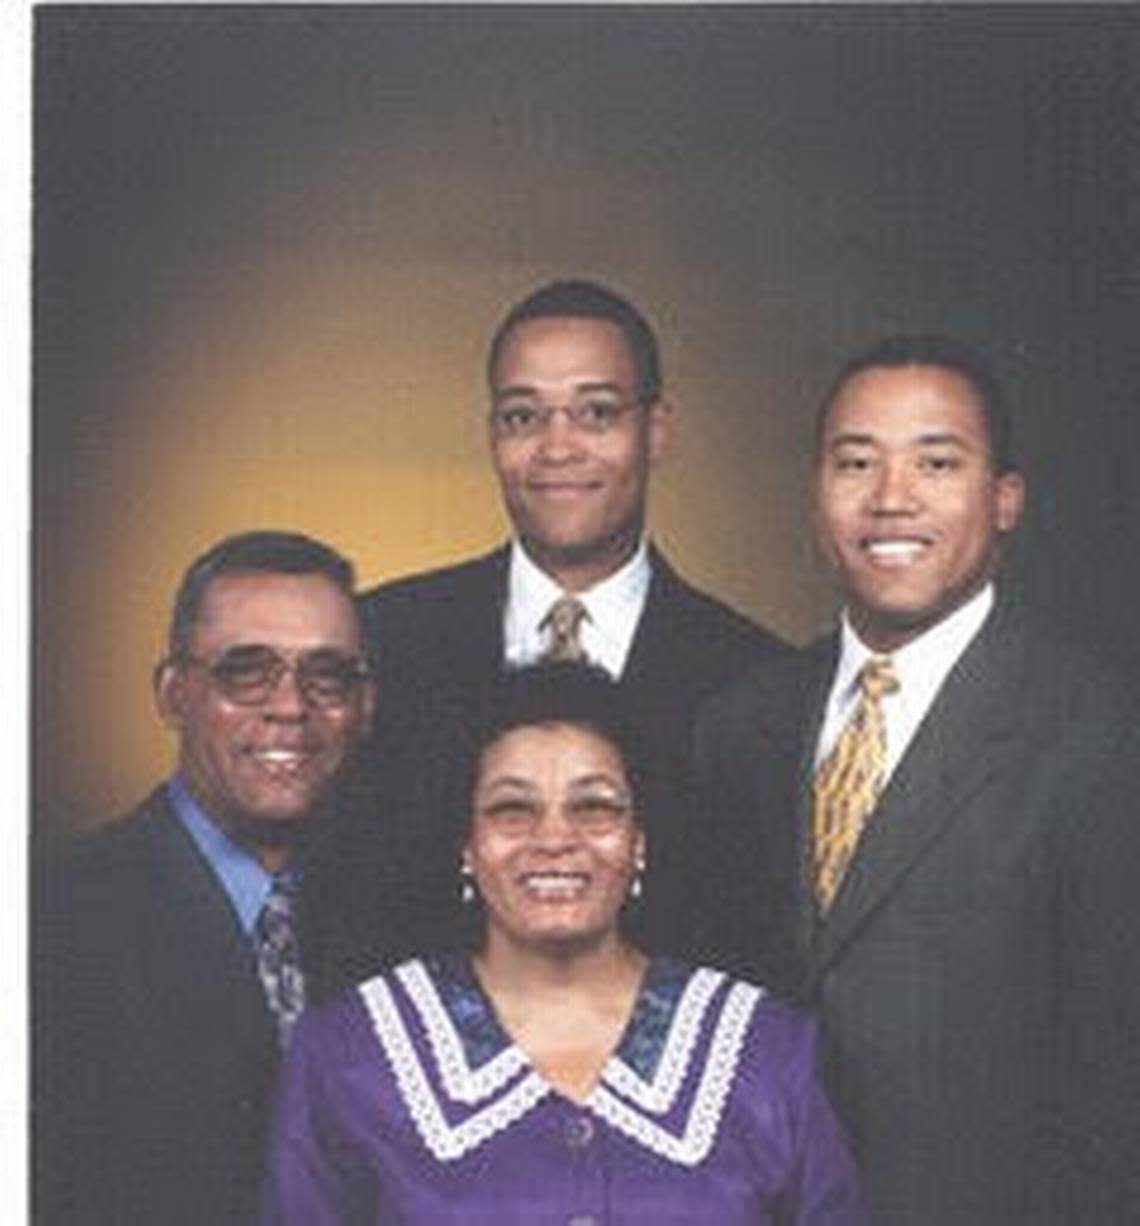 The Wake family, from left: Lee, Virginia, Kevin and John Wake.